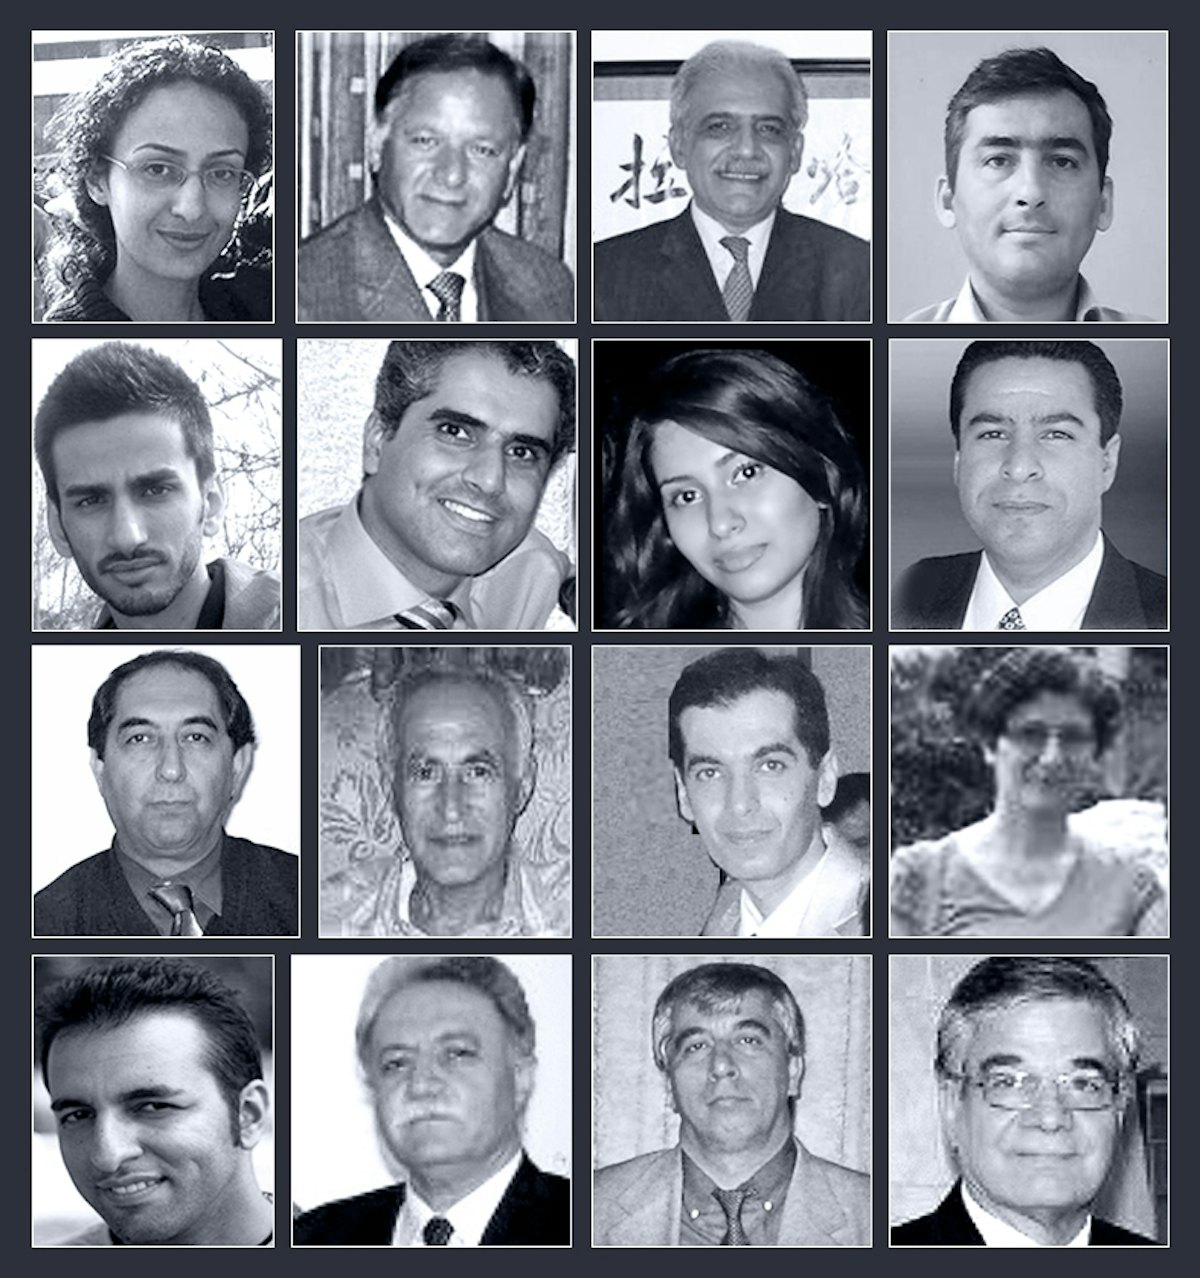 The 16 Baha'is initially detained after Iranian authorities raided around 30 homes associated with staff and faculty of the Baha'i Institute for Higher Education, in May this year. Most recent information indicates that 11 remain in prison.